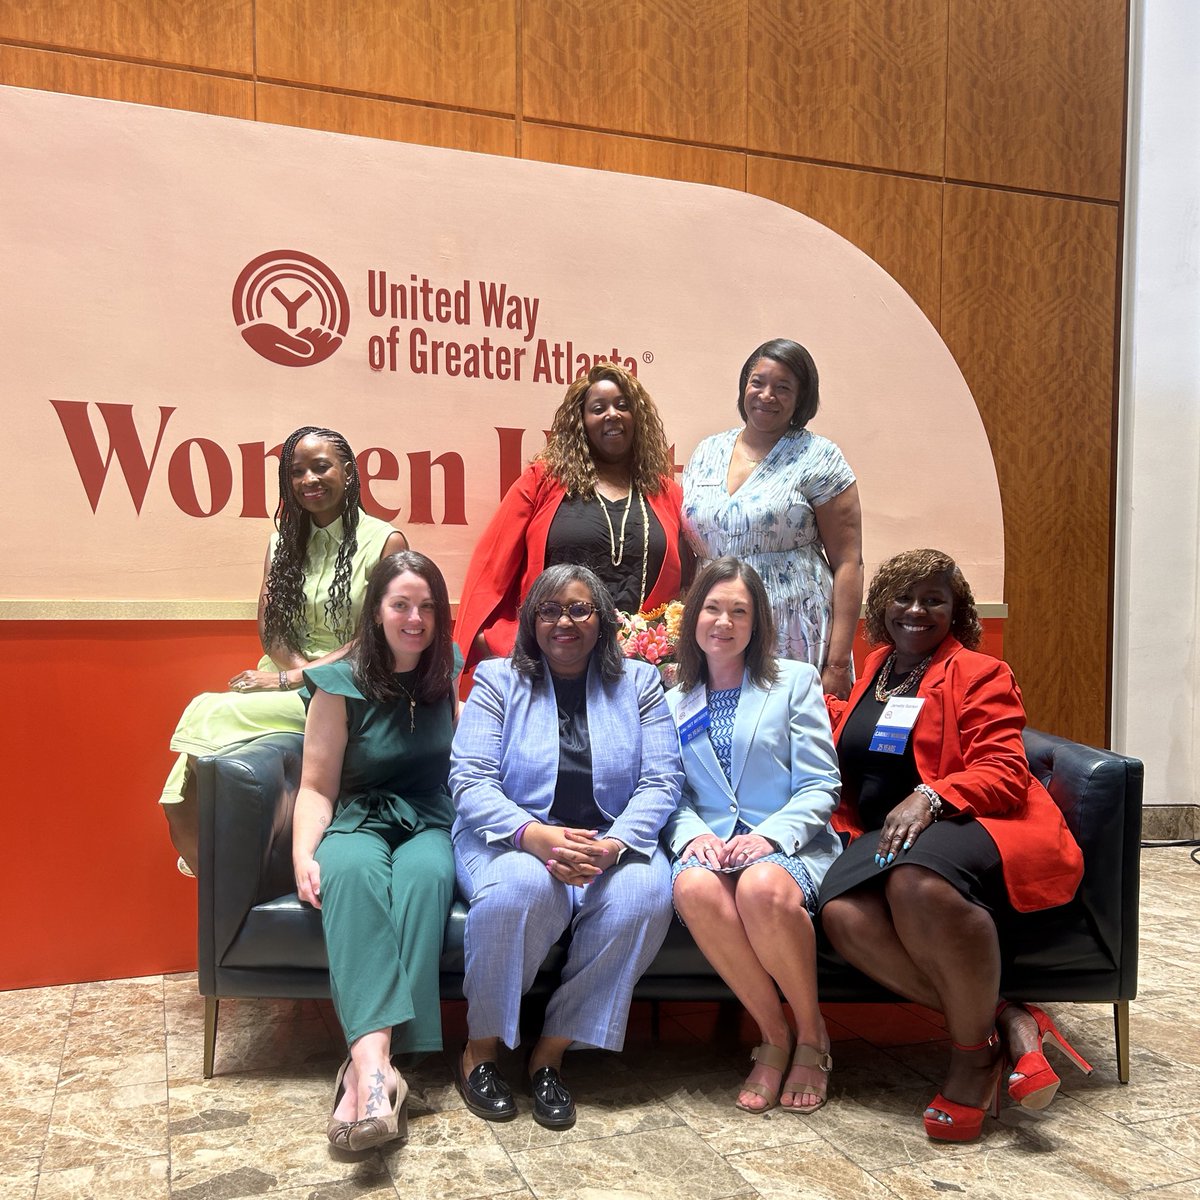 That concludes our Women’s Leadership Breakfast! Thank you again to everyone who attended! You can be a part of improving economic stability for women and their families all across Greater Atlanta by donating and becoming a member today: uwatl.org/wlb24 #womenunitedatl